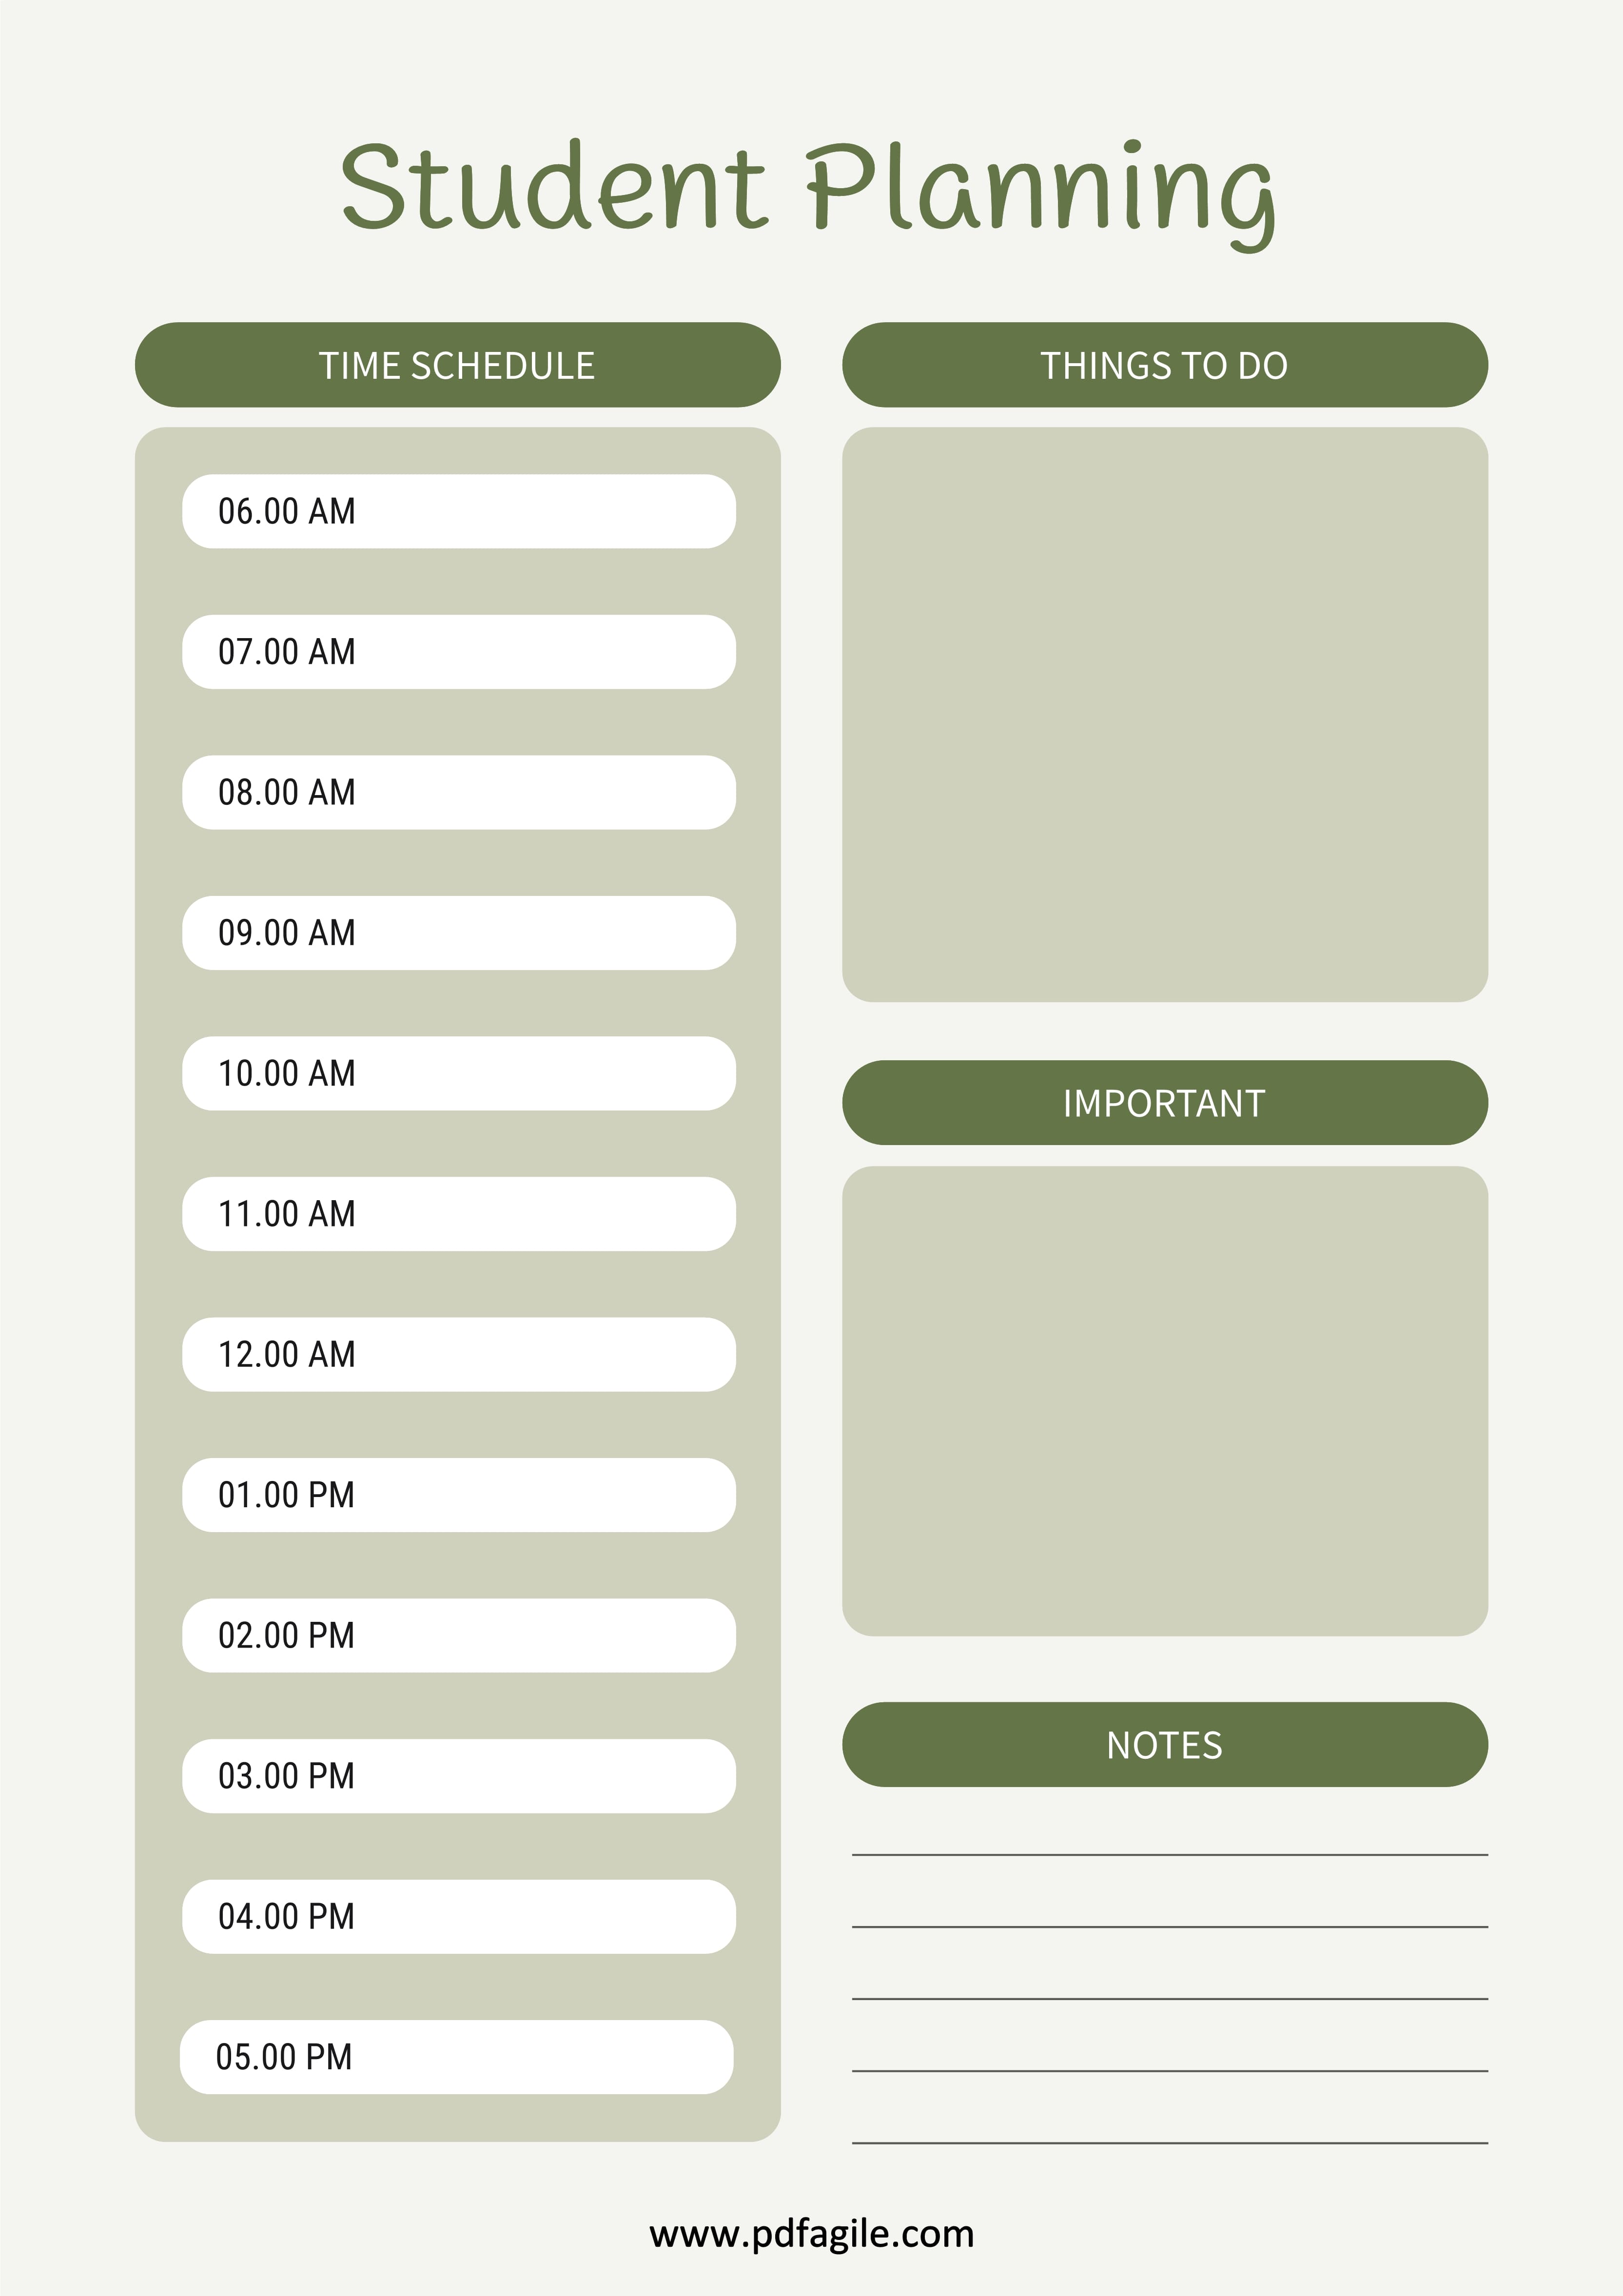 Student Planning Template